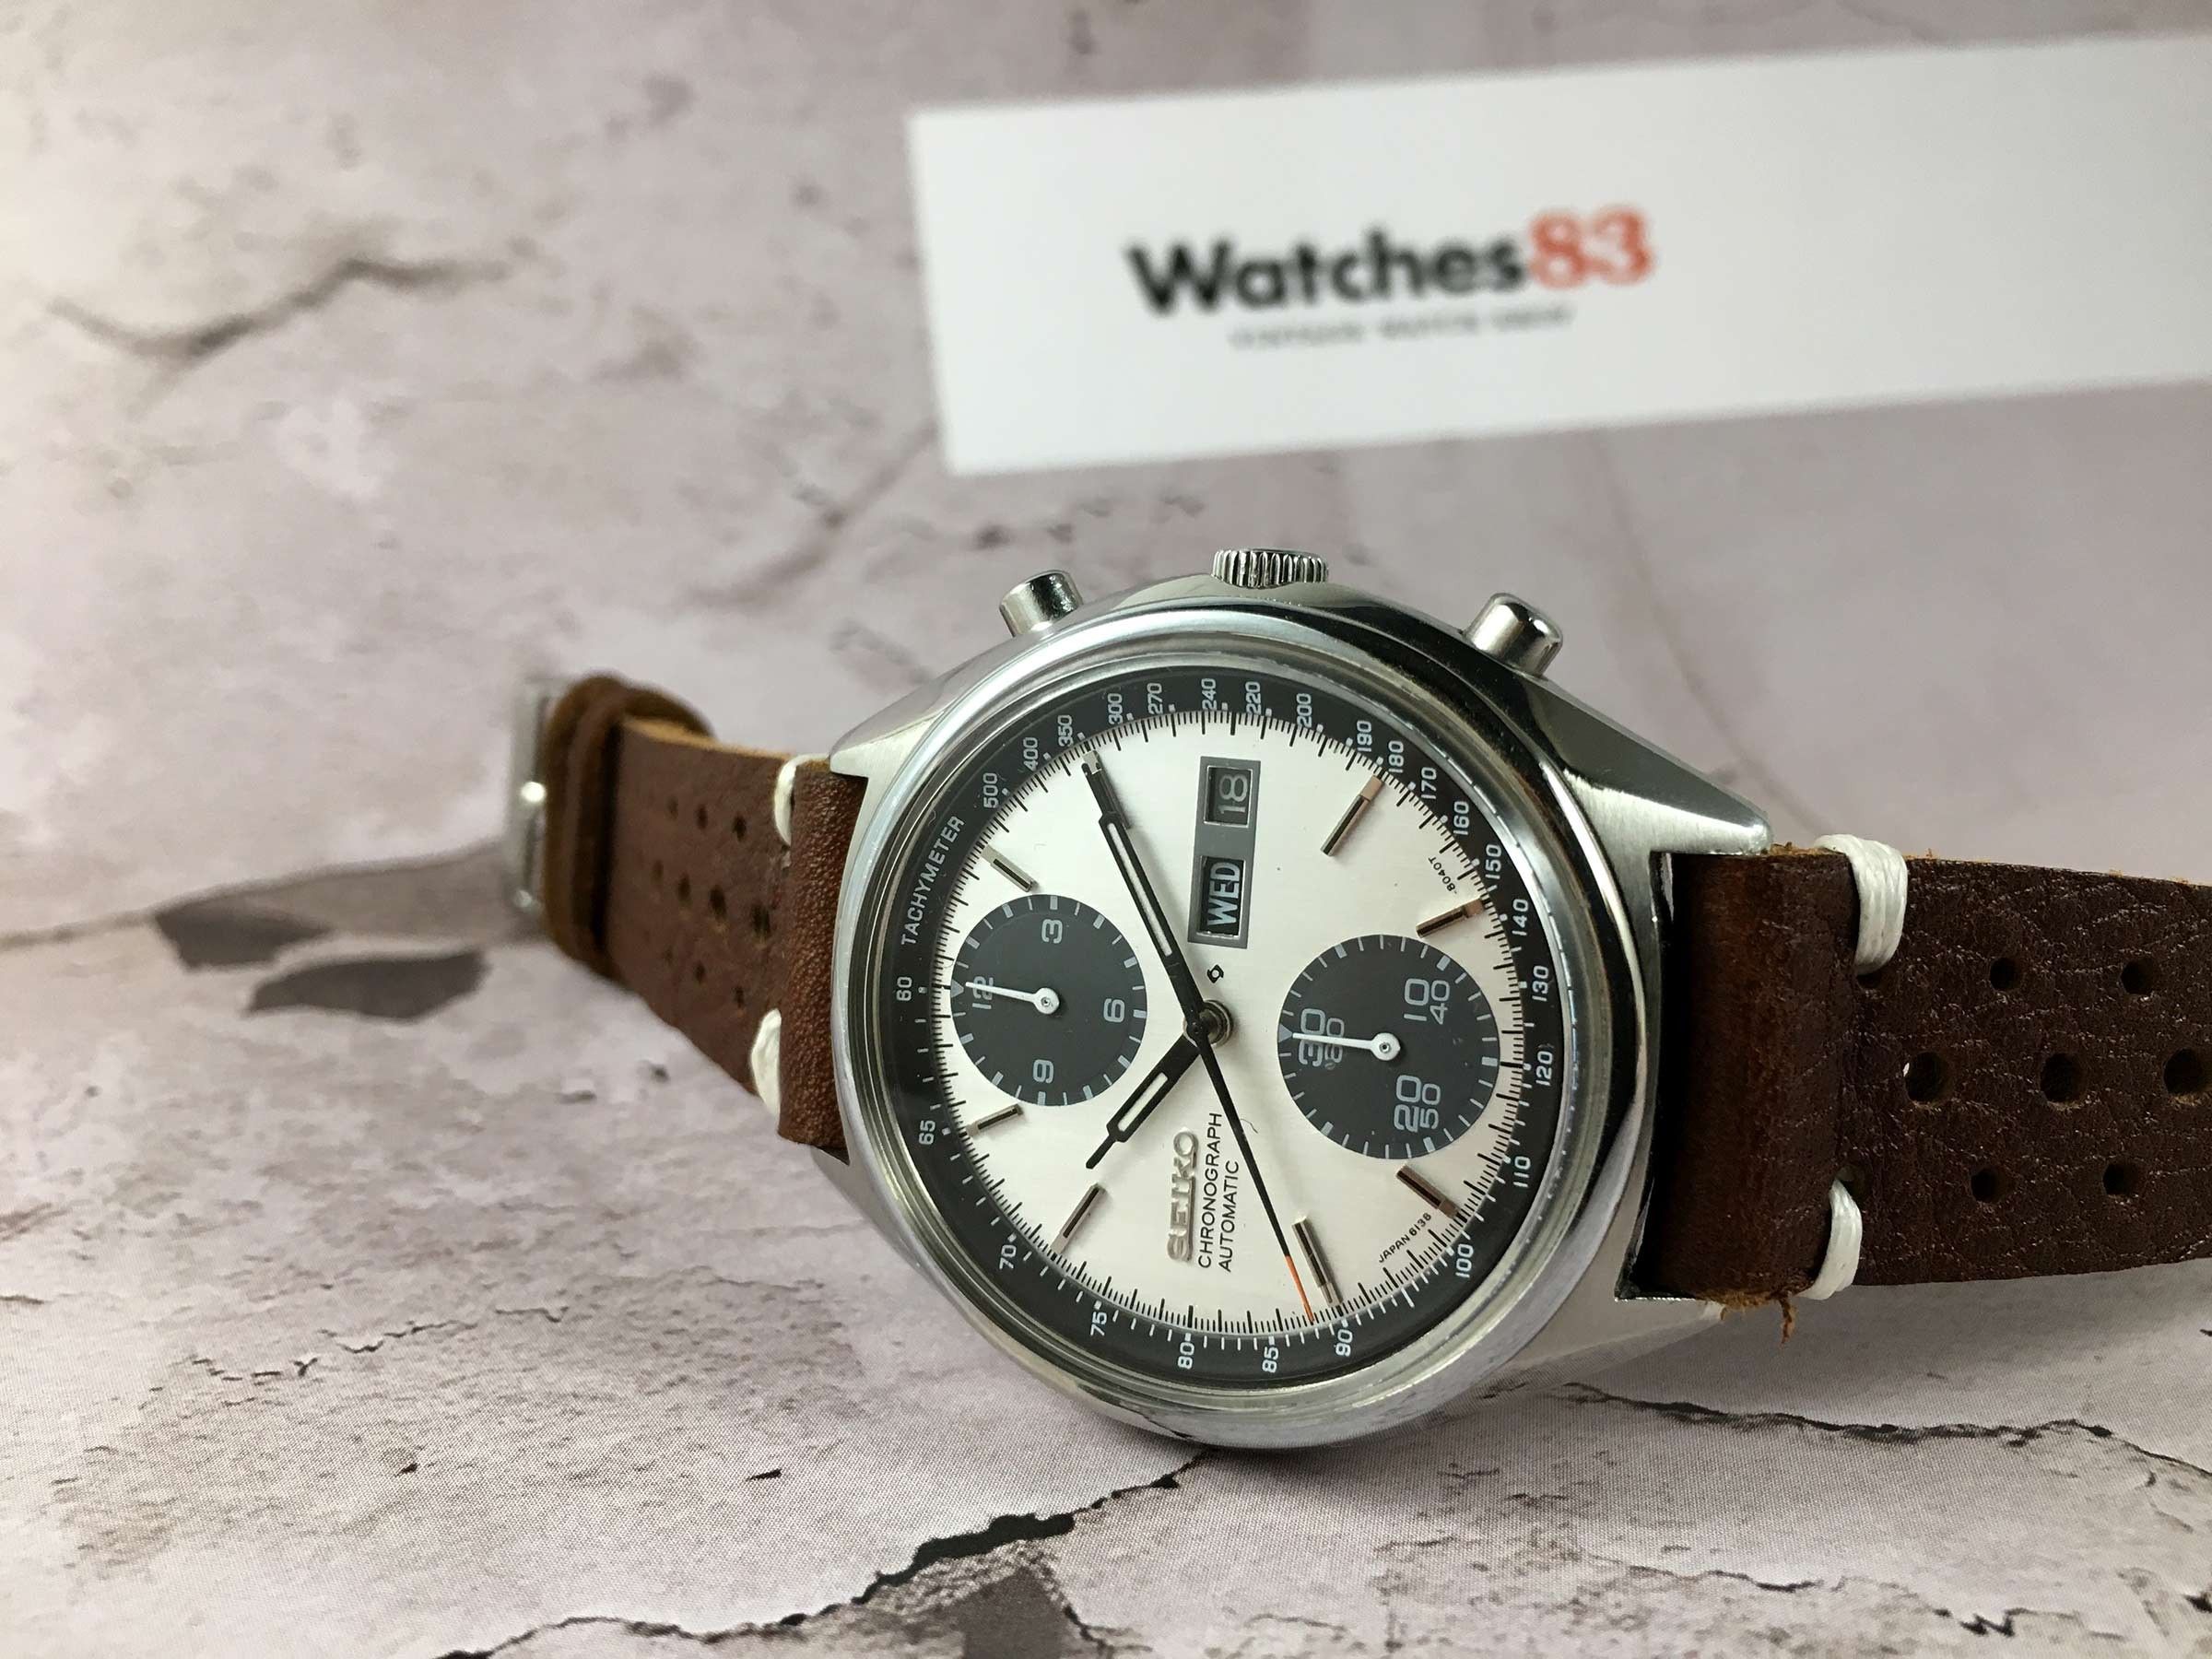 Seiko Panda Vintage automatic chronograph watch Ref 6138-8020 Cal. 6138 ***  SPECTACULAR *** Seiko Vintage watches - Watches83